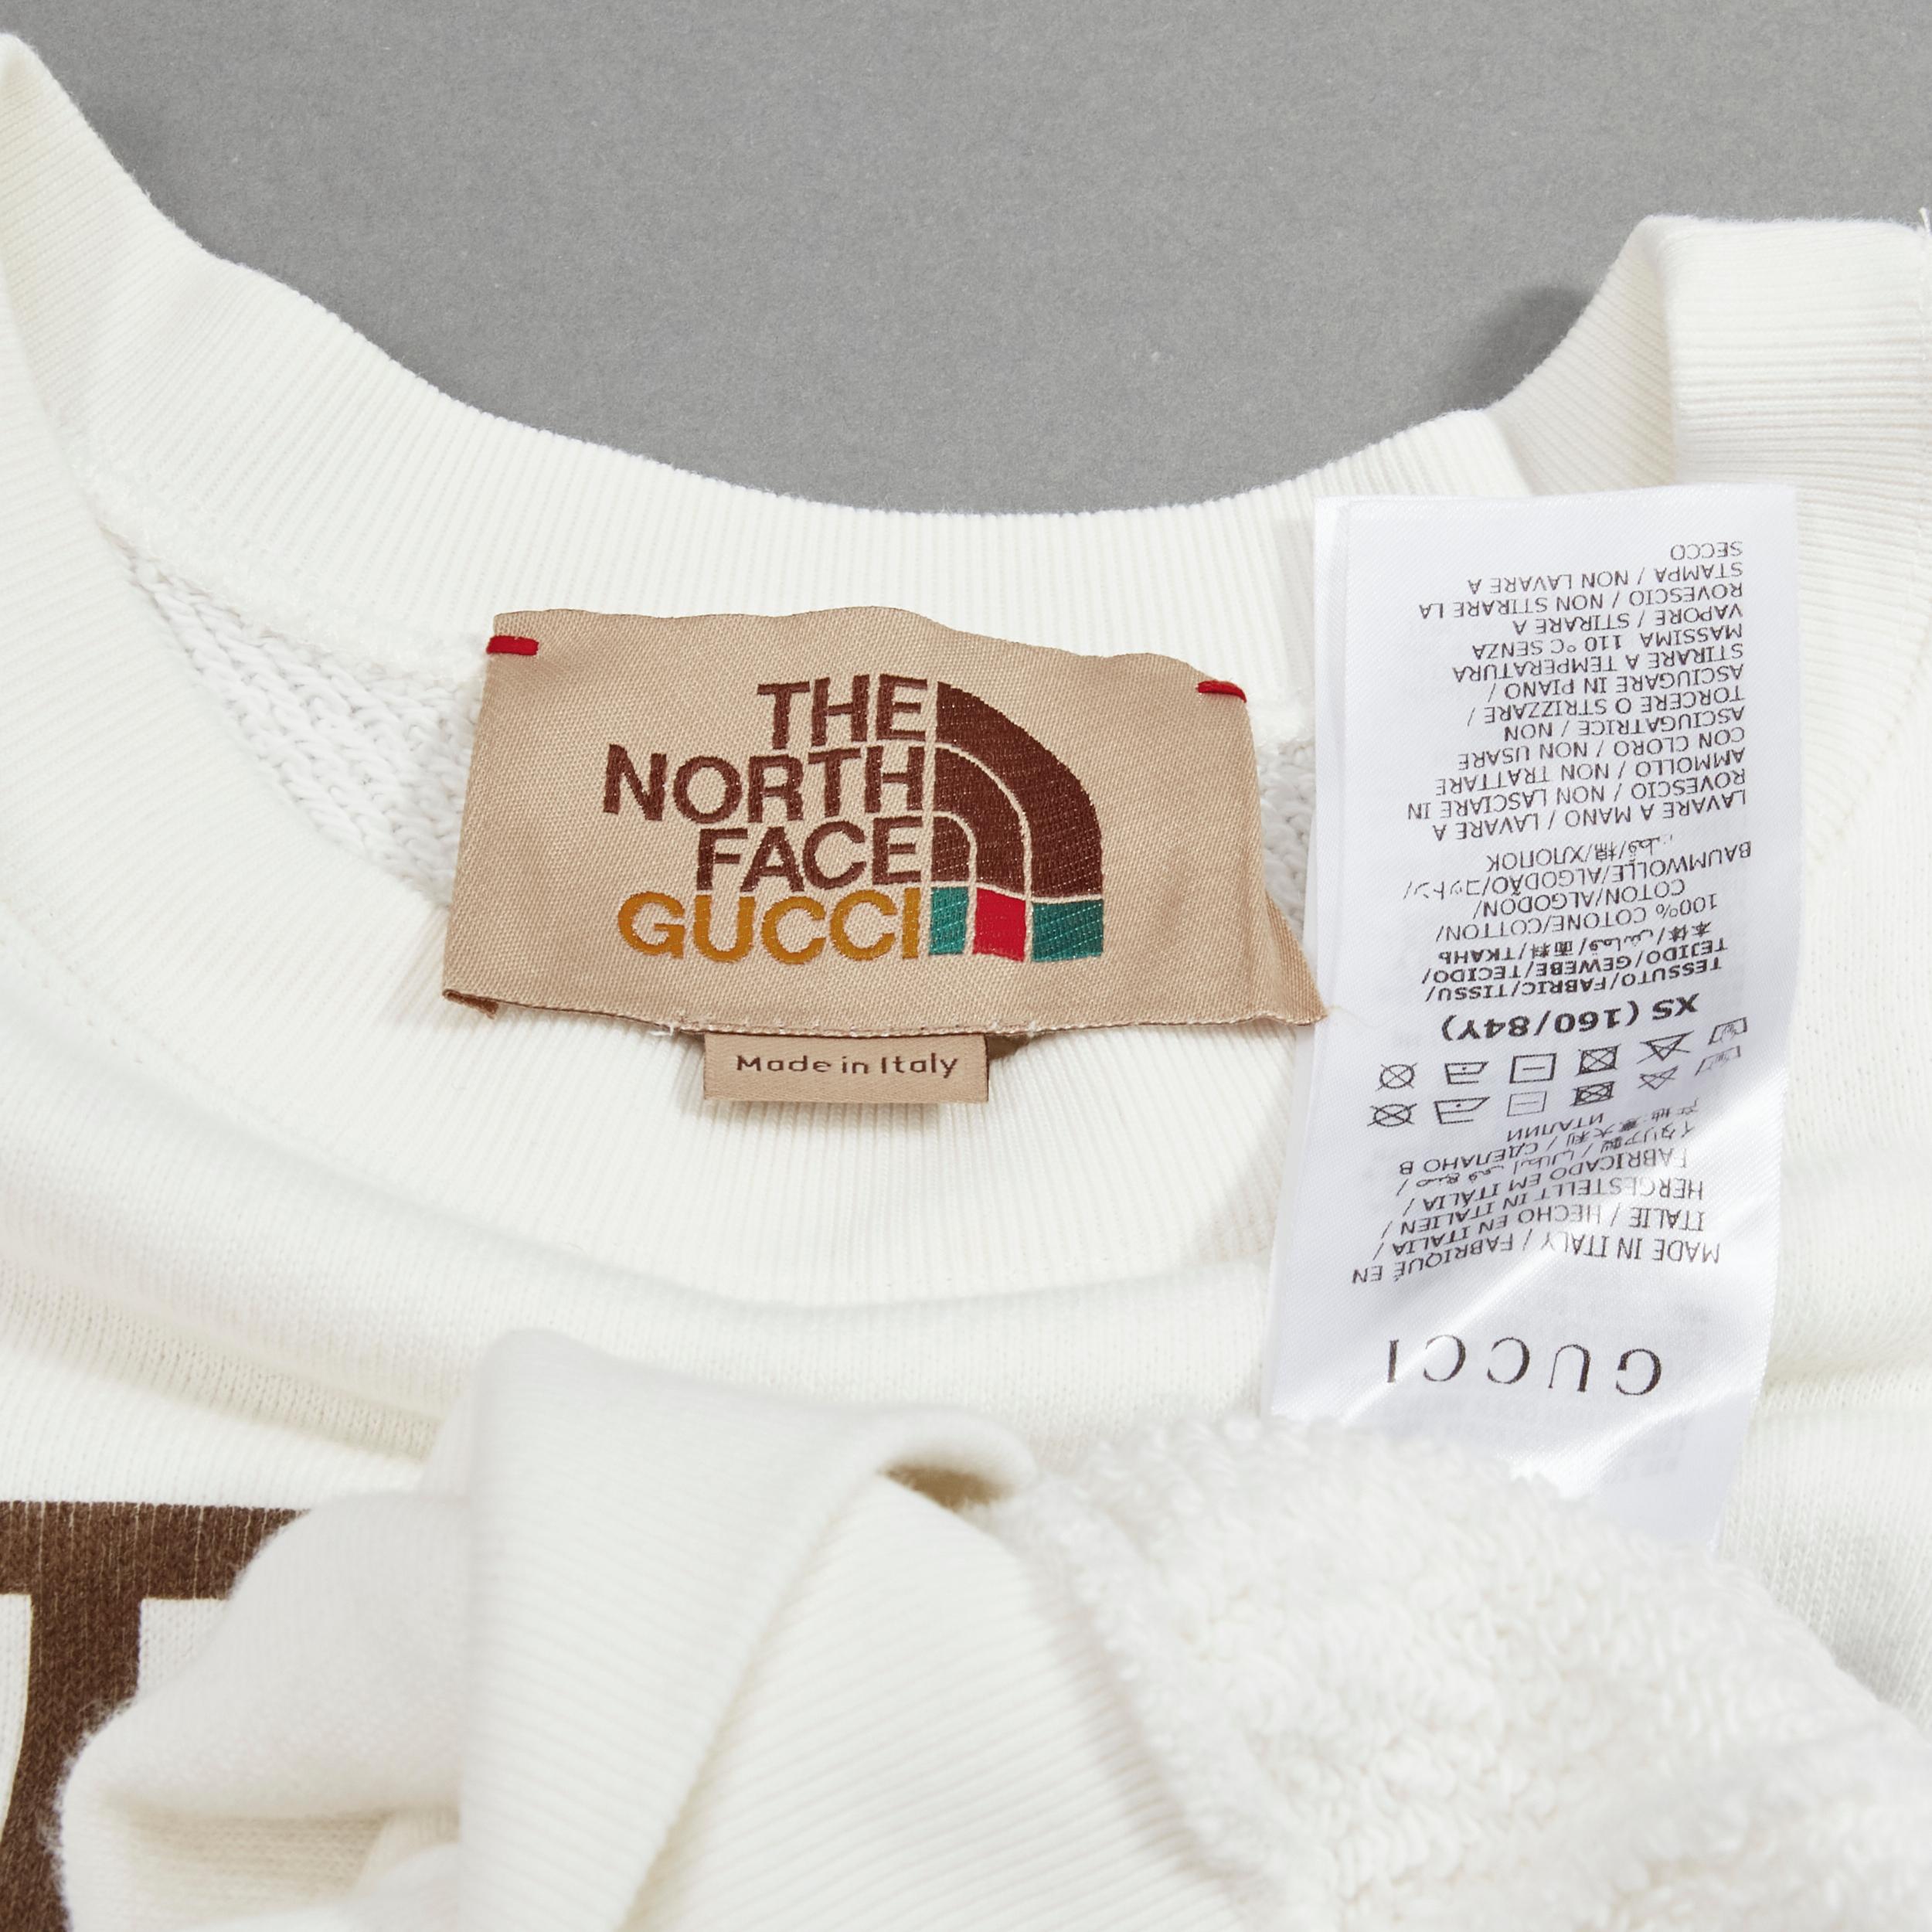 GUCCI THE NORTH FACE logo print white cotton oversized sweatshirt pullover XS For Sale 4